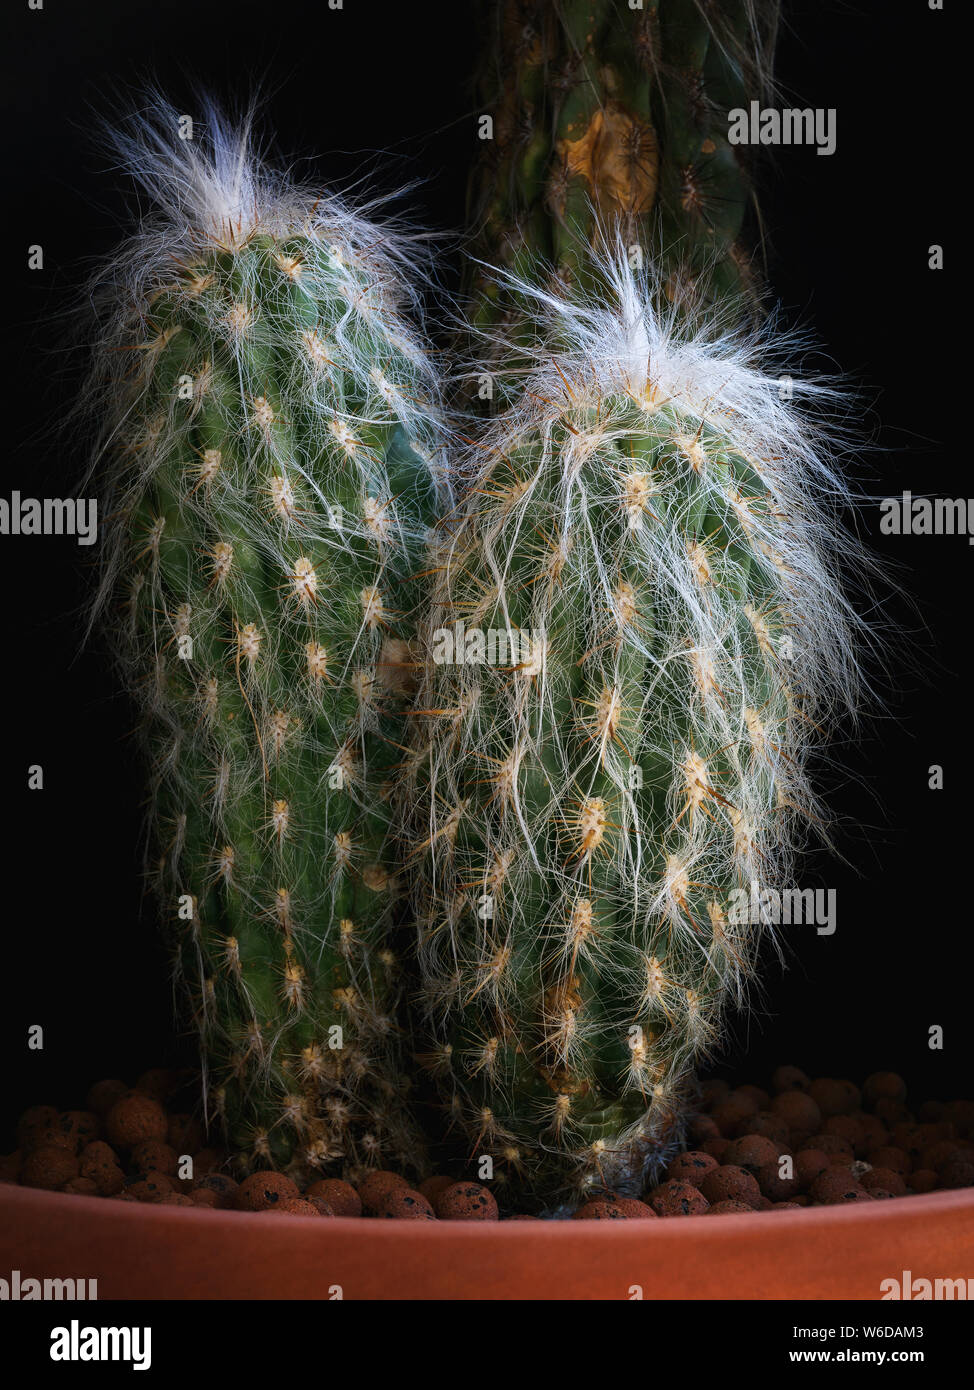 Cactus against black background. Cactaceae plant, arborescent, with branched trunk covered by short radial yellow spines with brown tip. The succulent Stock Photo